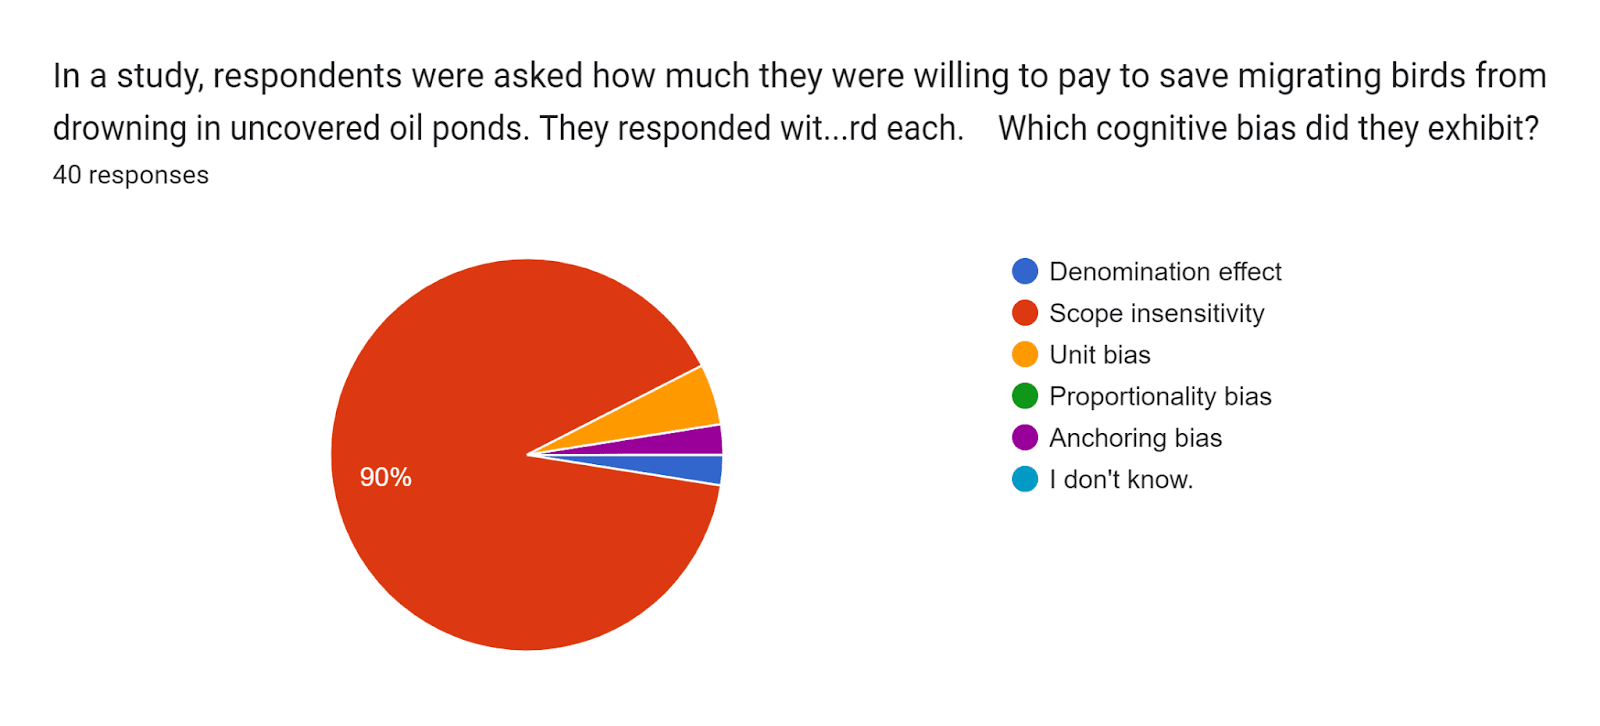 Forms response chart. Question title: In a study, respondents were asked how much they were willing to pay to save migrating birds from drowning in uncovered oil ponds. They responded with the following answers:



- They’re willing to pay $80 to save a total of 2,000 birds

- They’re willing to pay $78 to save a total of 20,000 birds

- They’re willing to pay $88 to save a total of 200,000 birds

Note: they’re NOT saying they’re willing to pay $80, $78, or $88 for one bird each. 


Which cognitive bias did they exhibit?
. Number of responses: 40 responses.